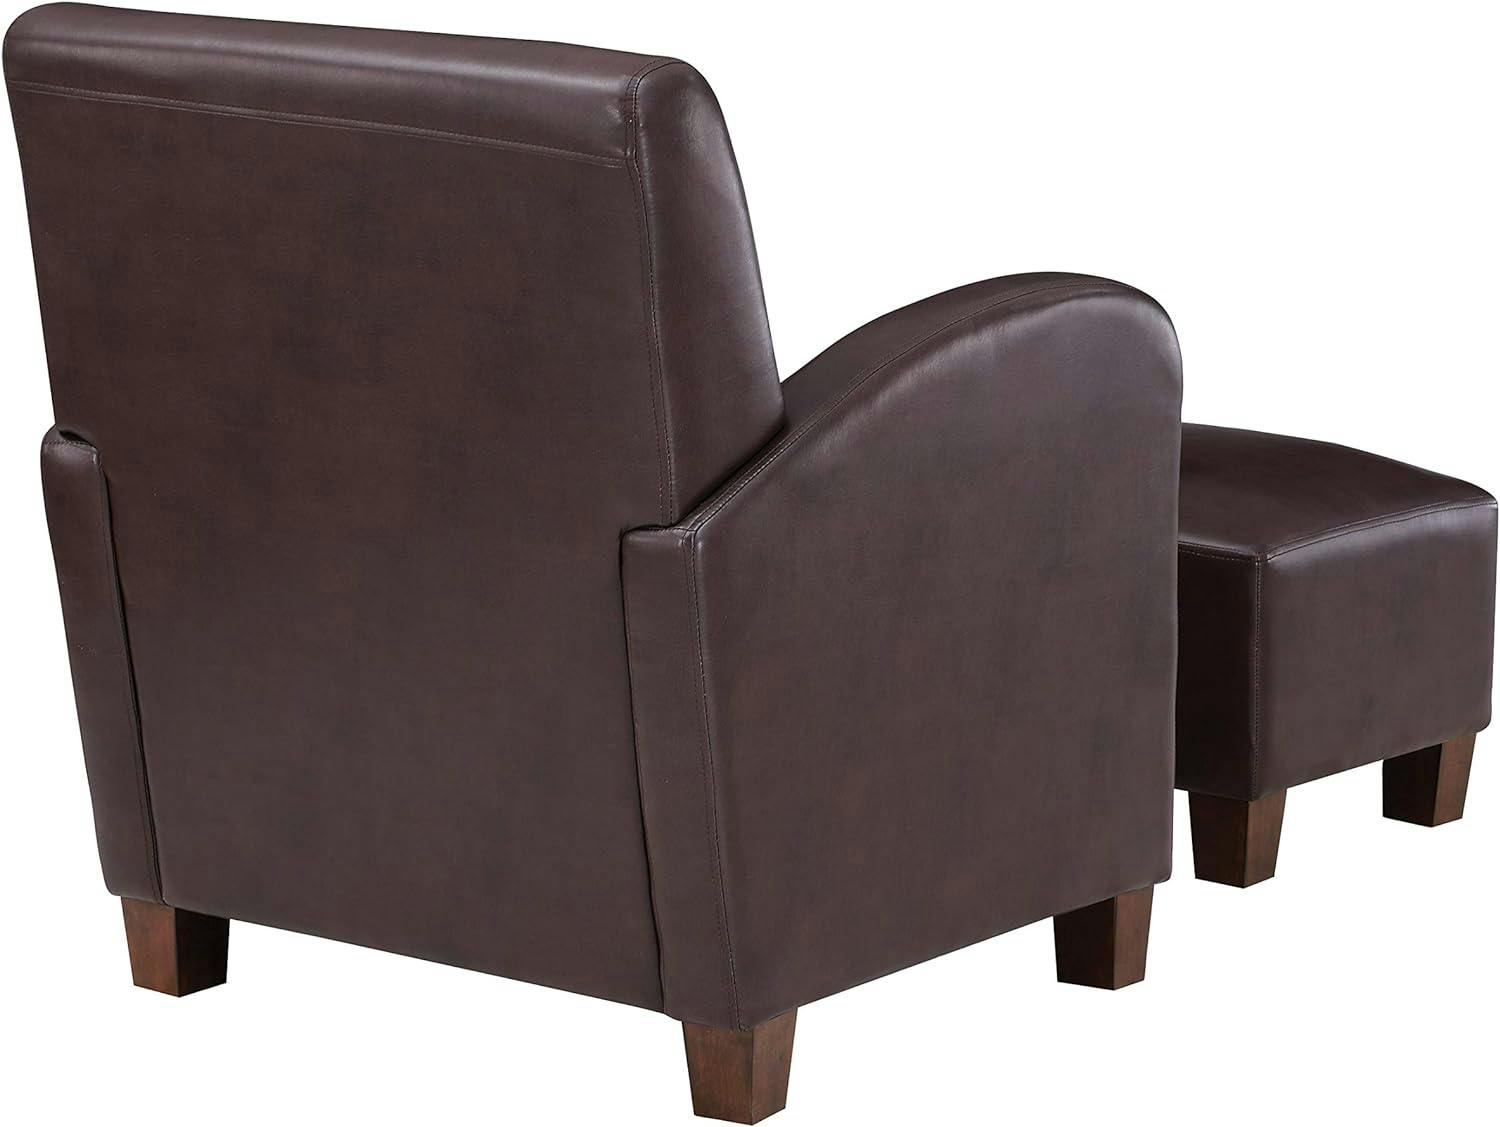 Cocoa Brown Faux Leather Club Chair & Ottoman